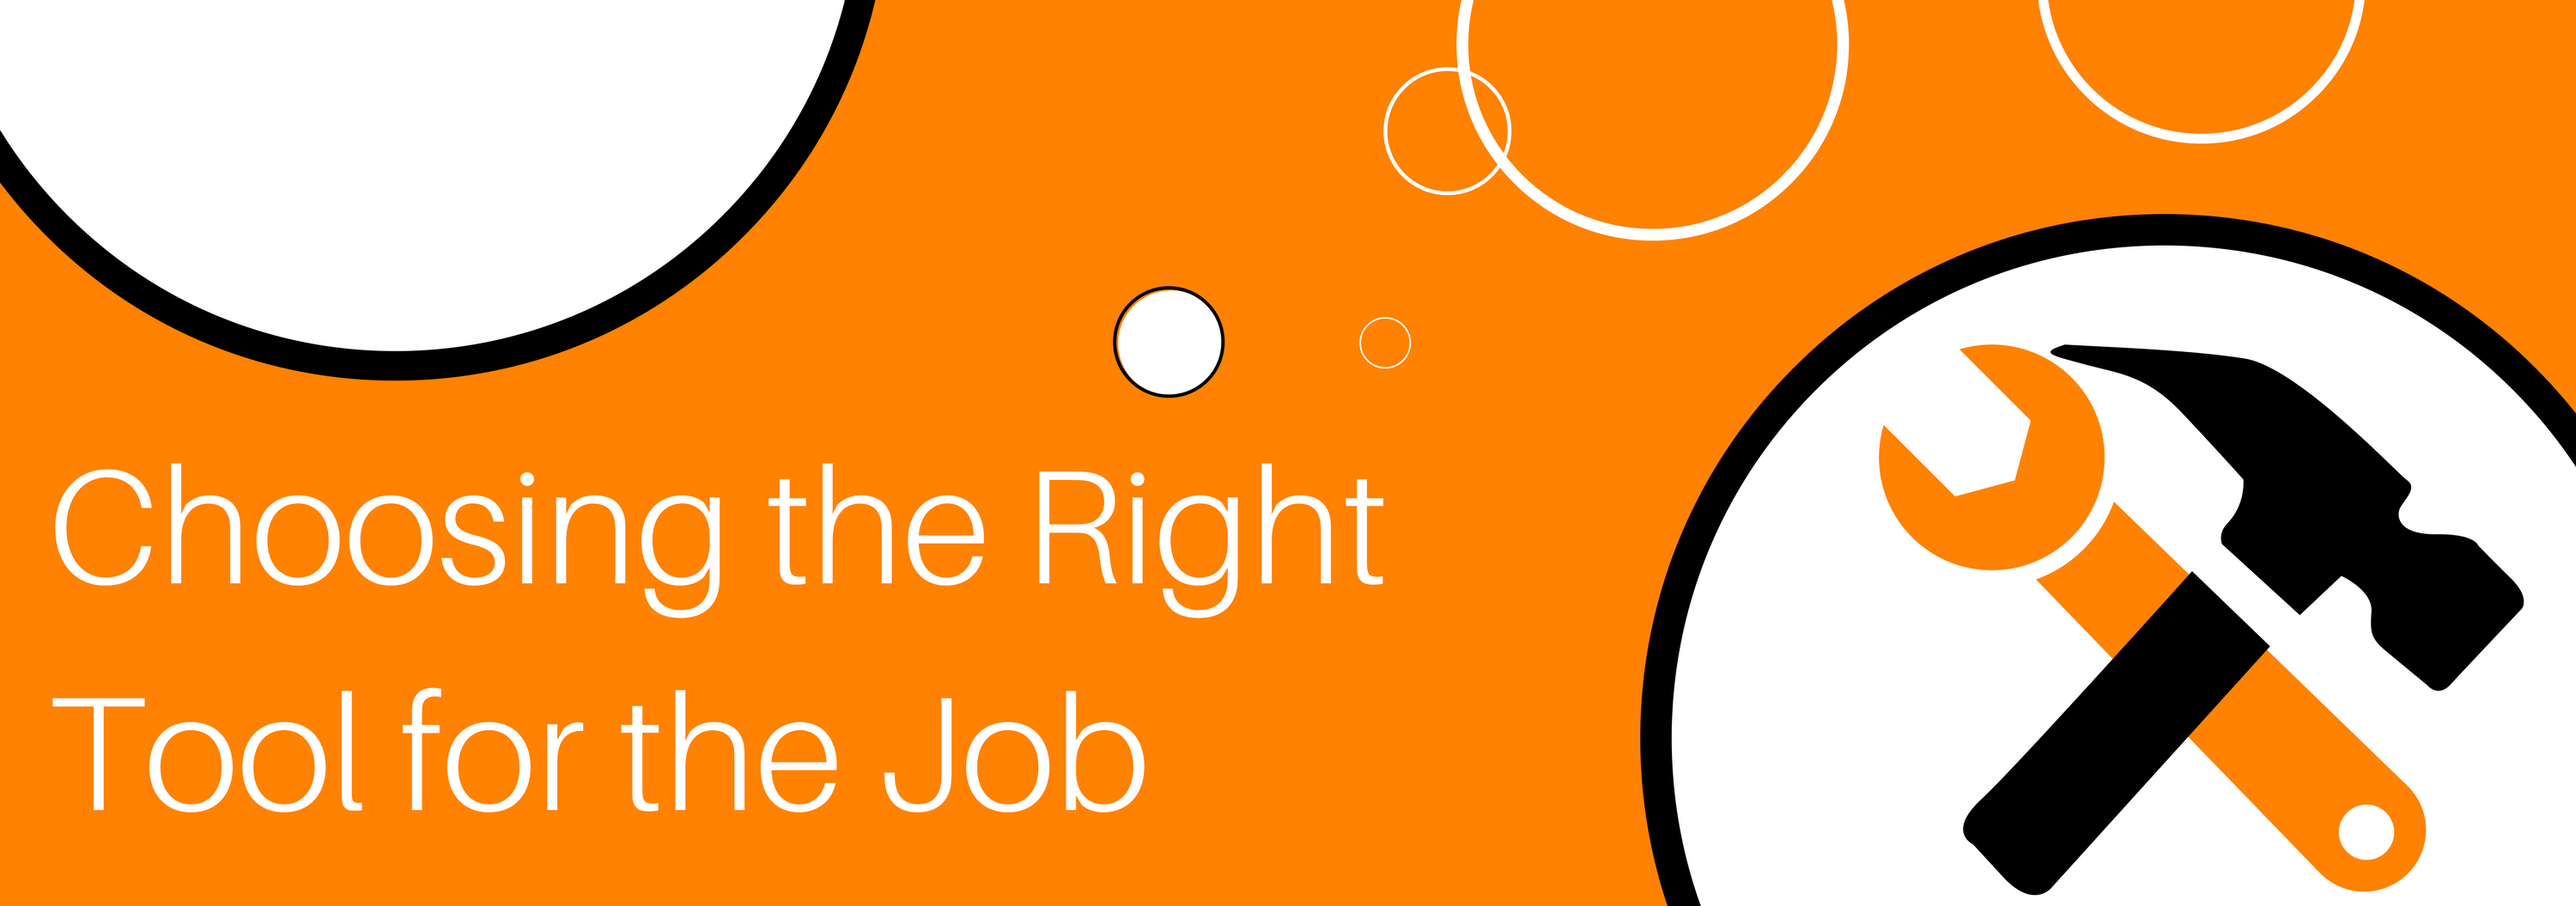 how can i find the right job for me 80